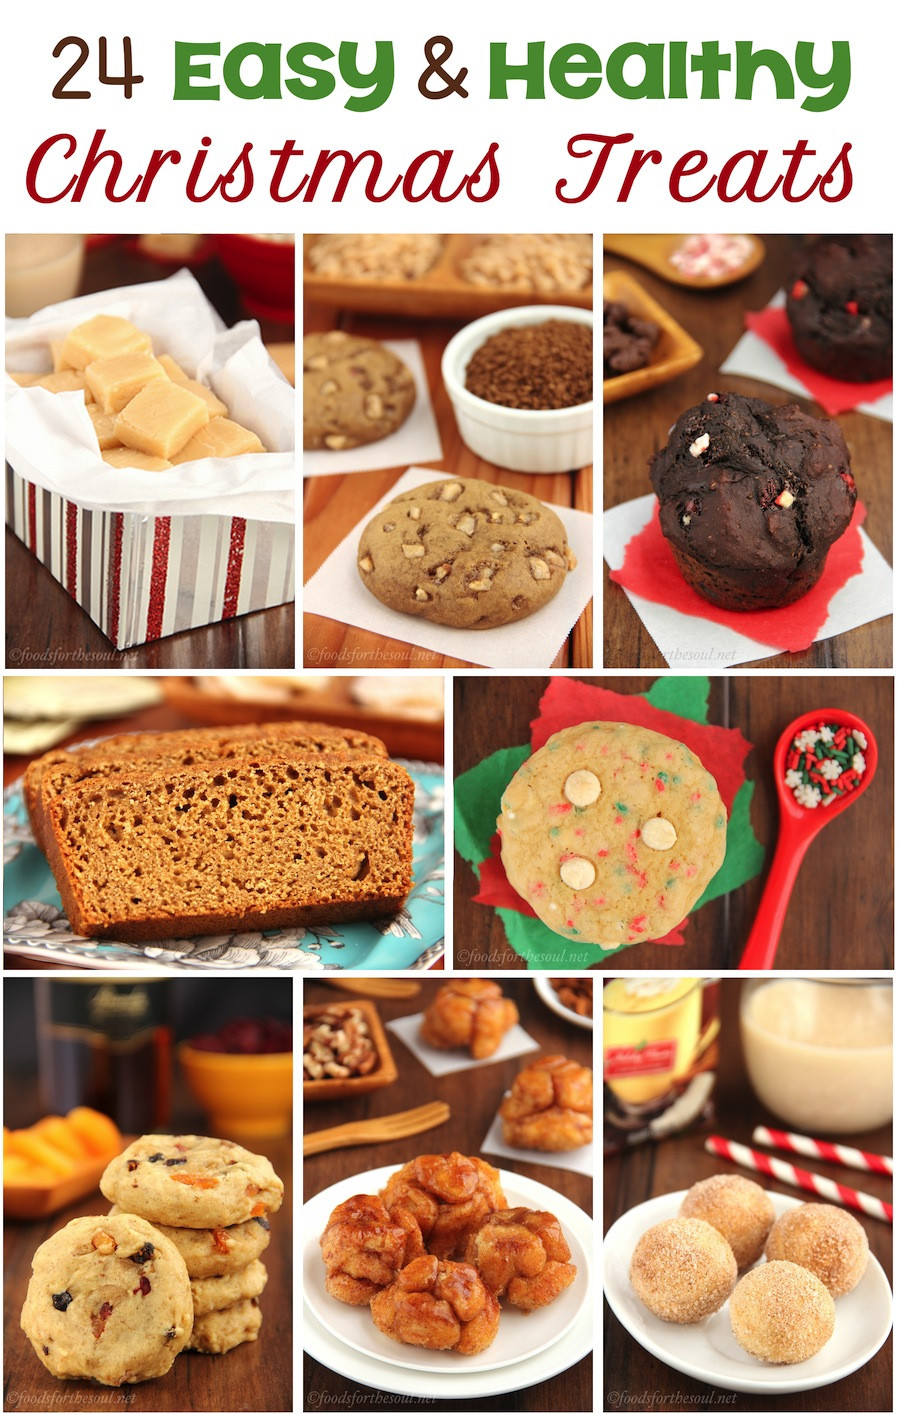 Low Calorie Christmas Desserts
 24 Easy & Healthy Christmas Treats